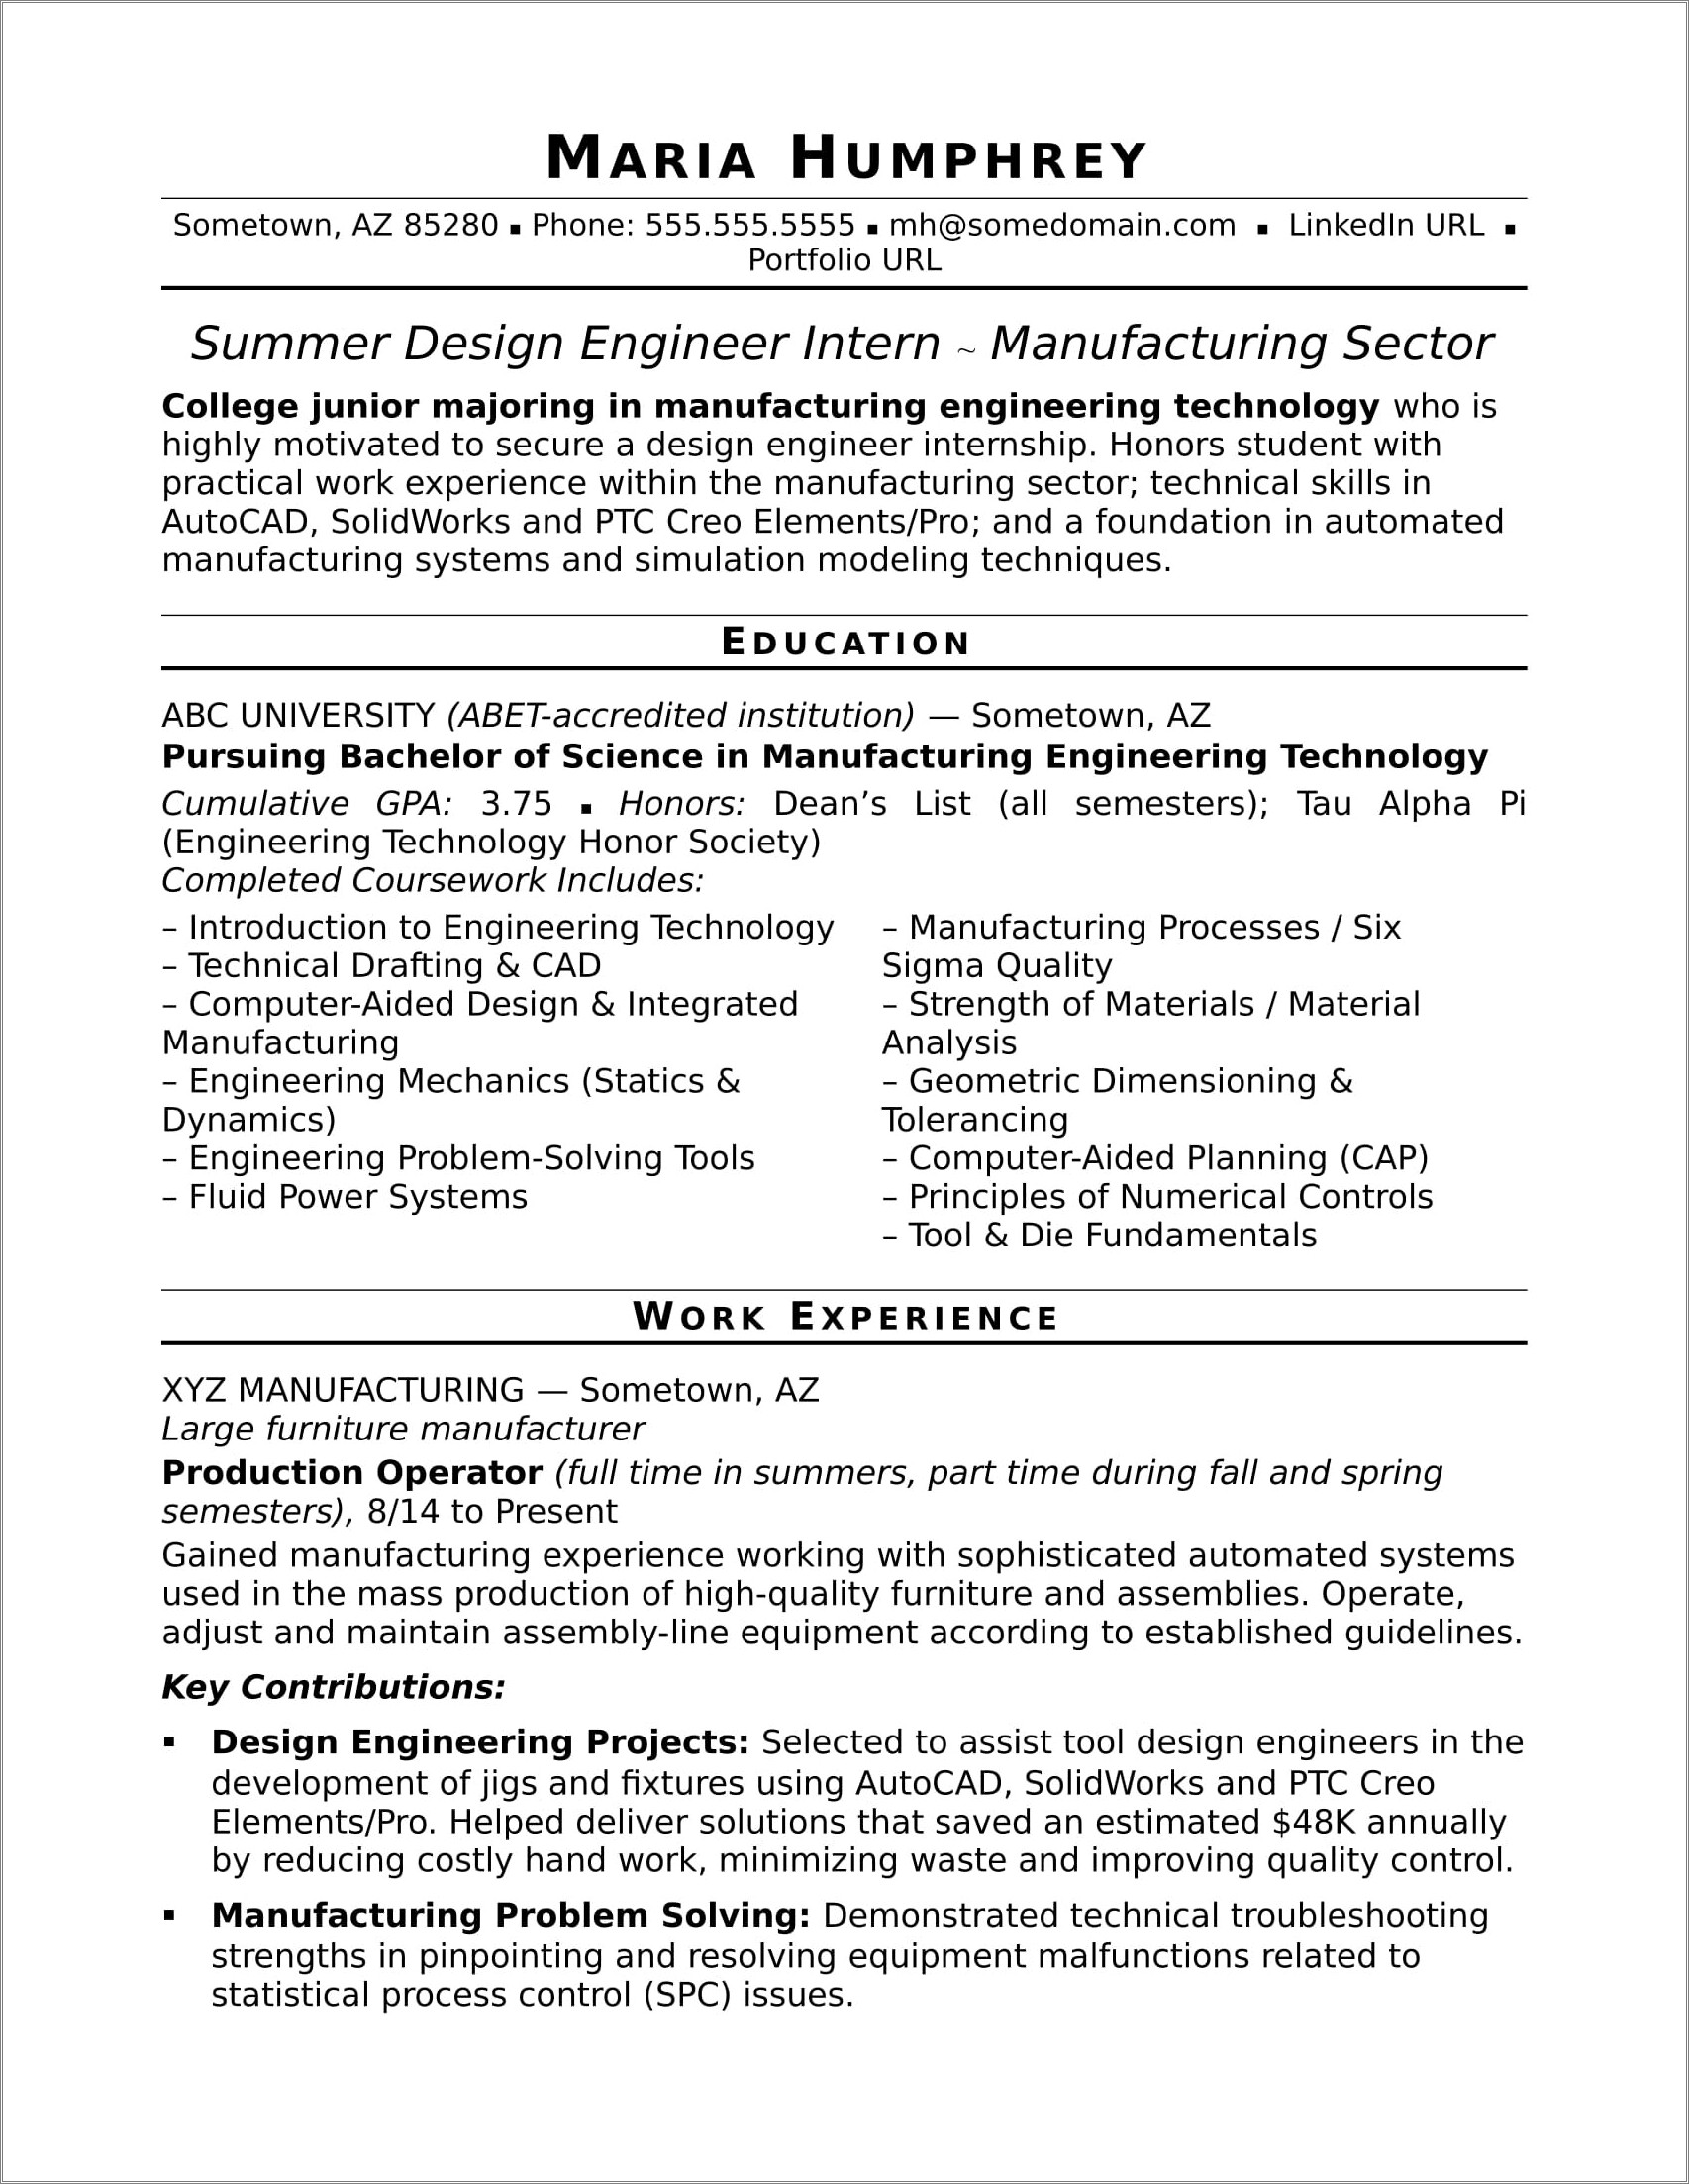 1 Year Experience Resume Format For Design Engineer